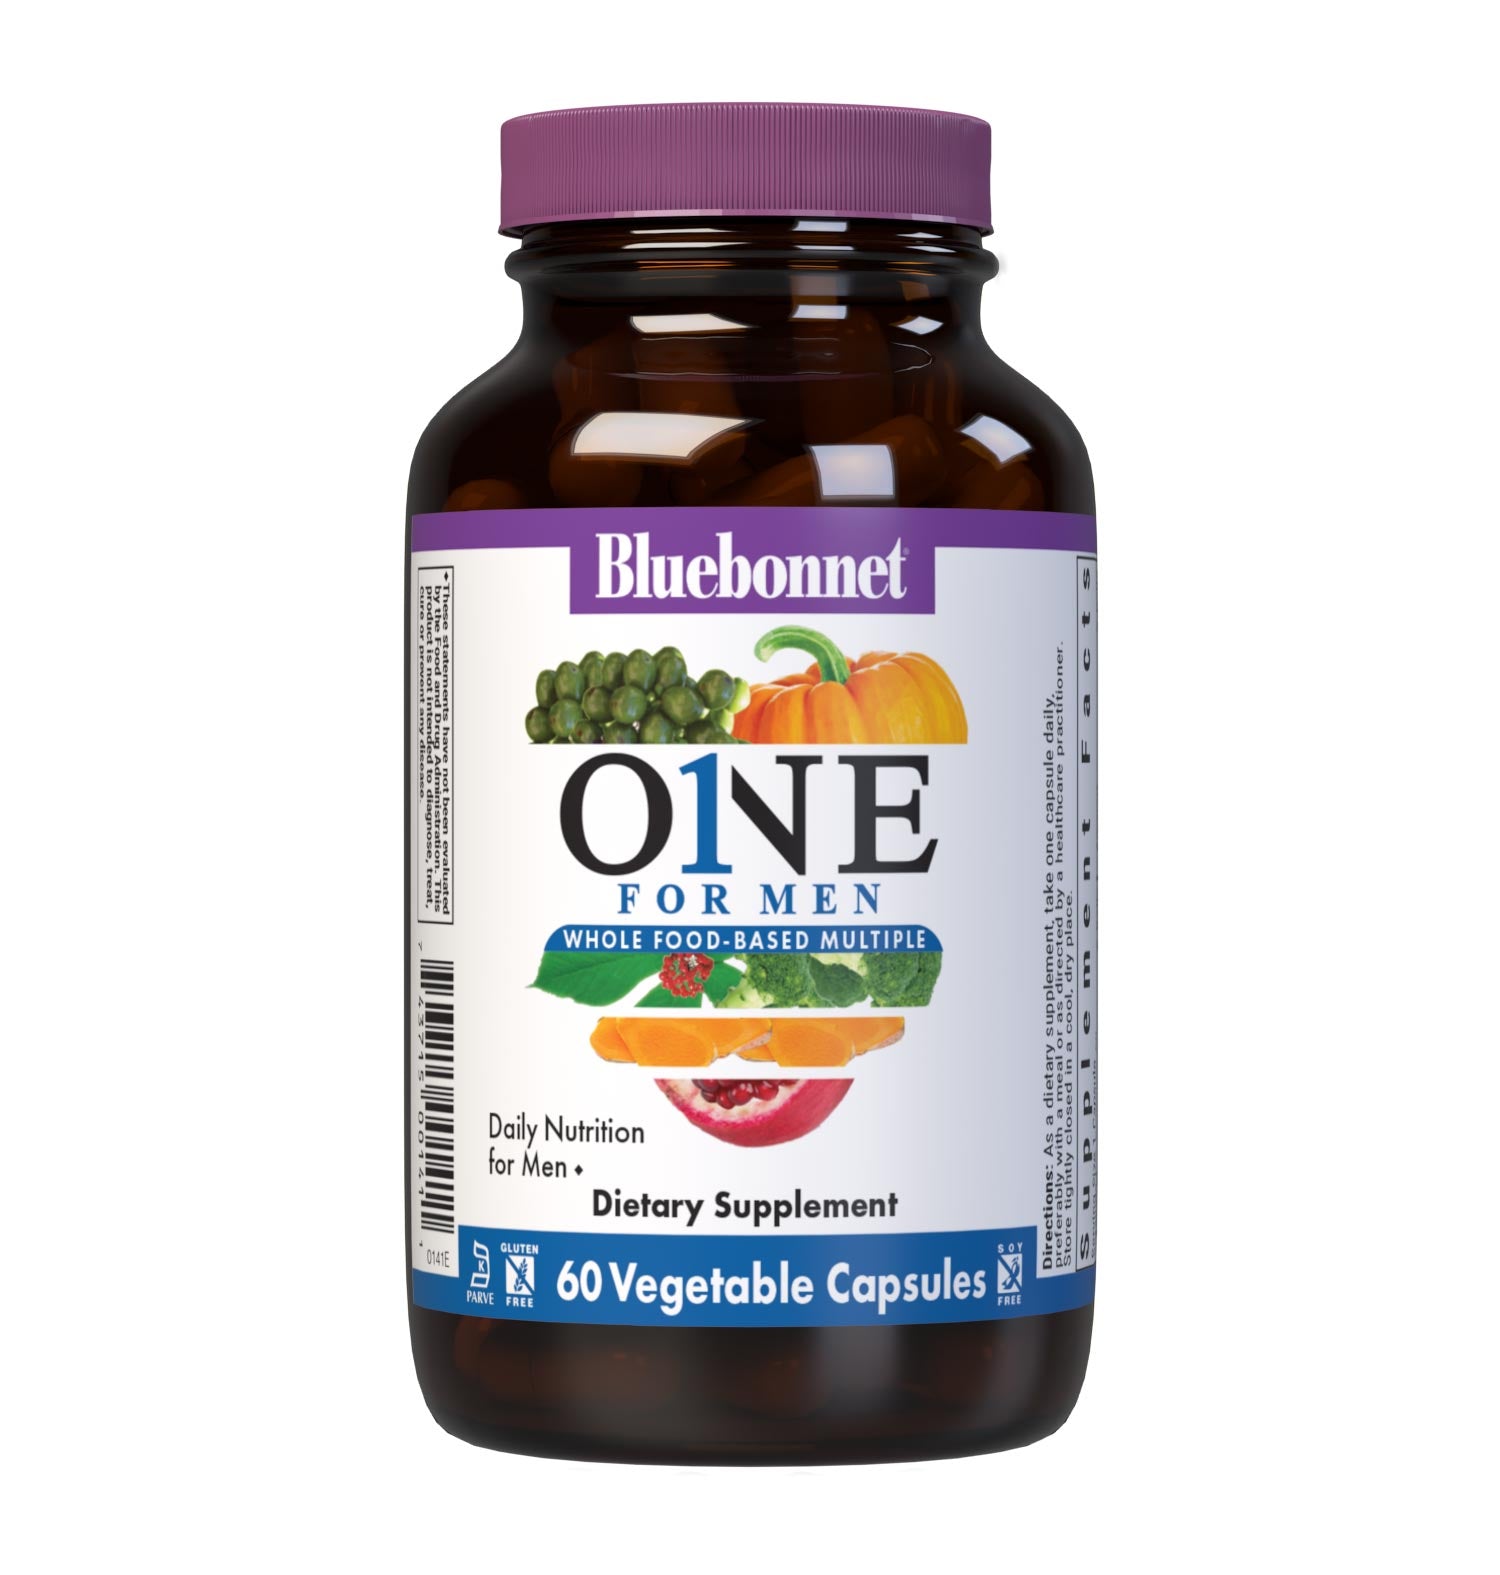 Bluebonnet’s Men's One Whole Food-Based Multiple 60 vegetable capsules is formulated with over 25 crucial nutrients like vitamin K2 and vitamin E from sunflower, all the coenzyme forms of the B vitamins, plus Albion chelated minerals in addition to an organic whole food vegetable blend, a plant-sourced enzyme blend, and a unique male health blend for daily nutrition and well being. #size_60 count